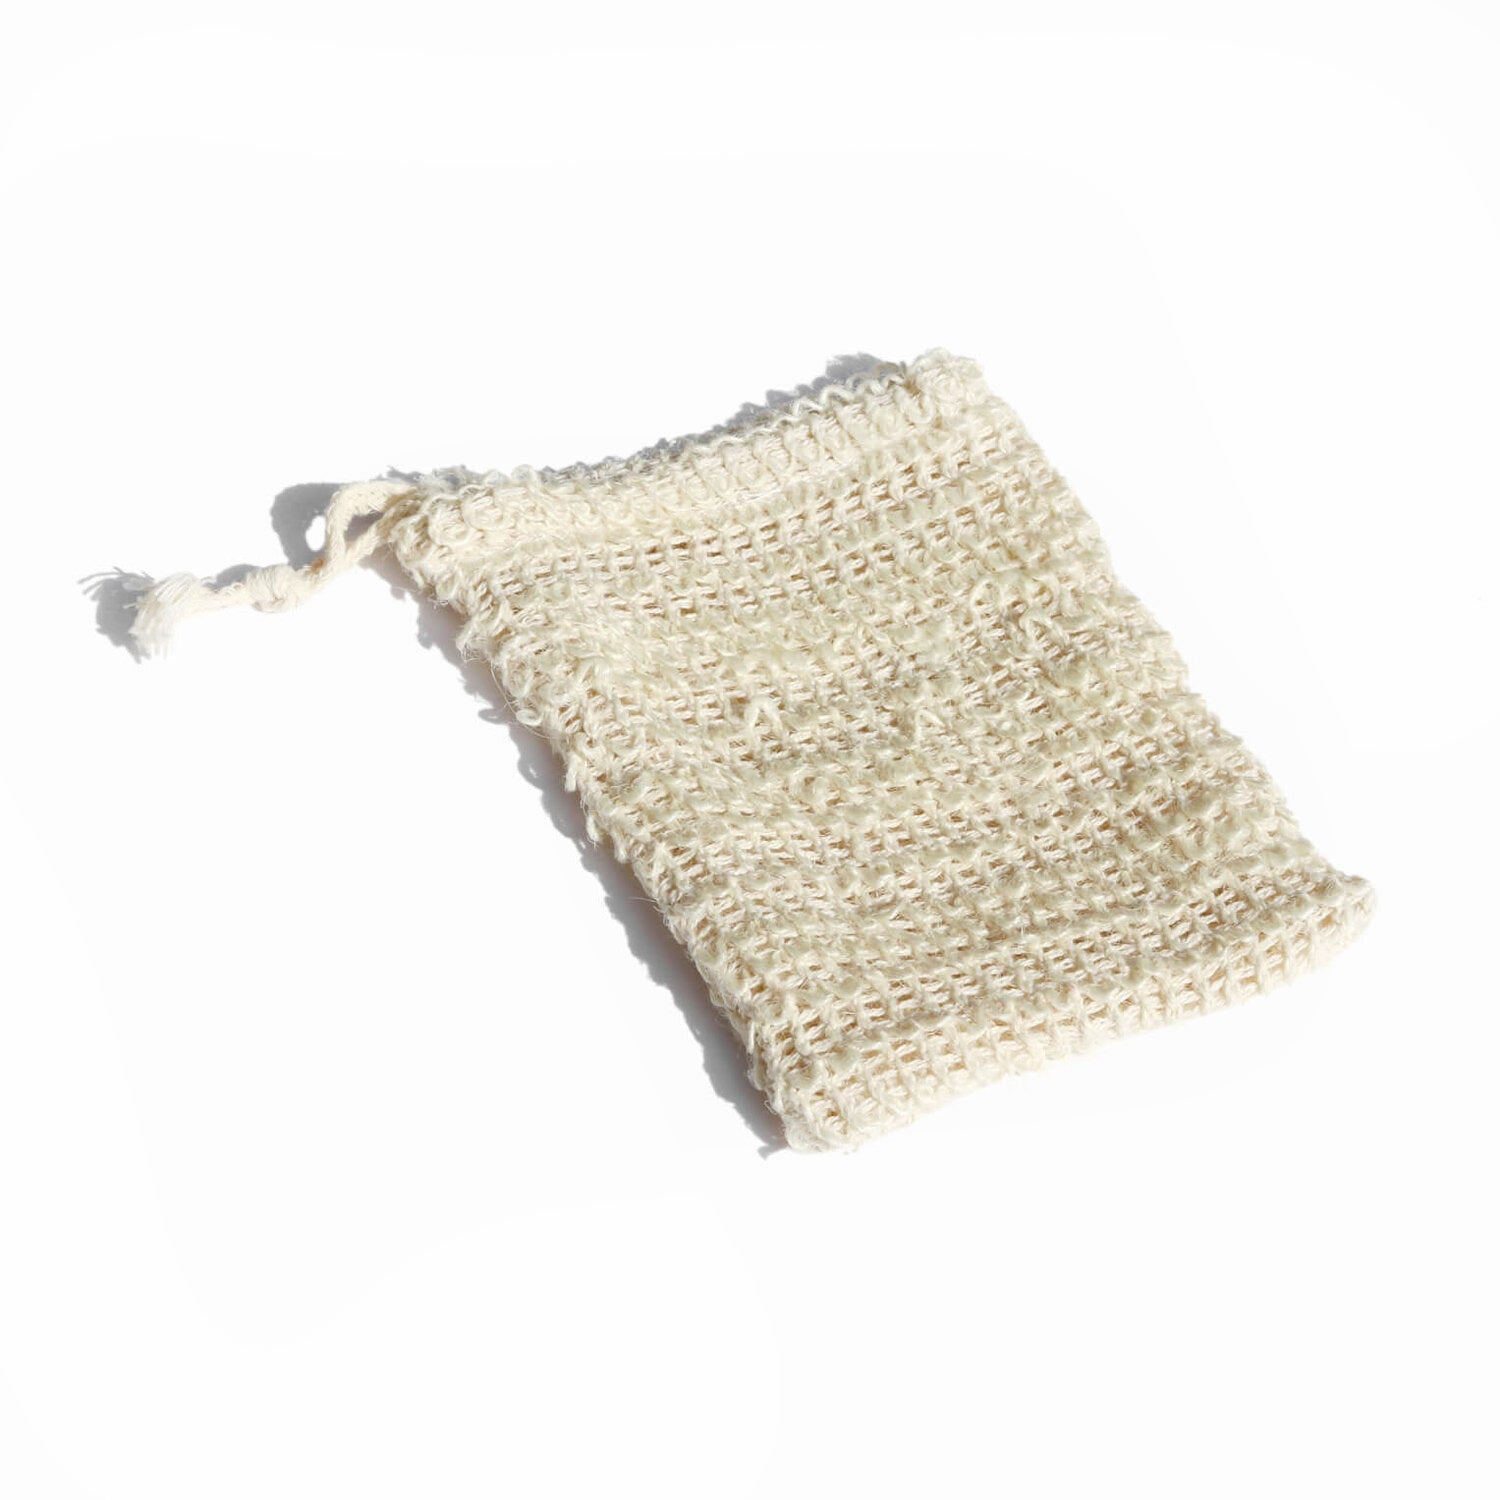 Sisal soup pouch for storing shampoo bar